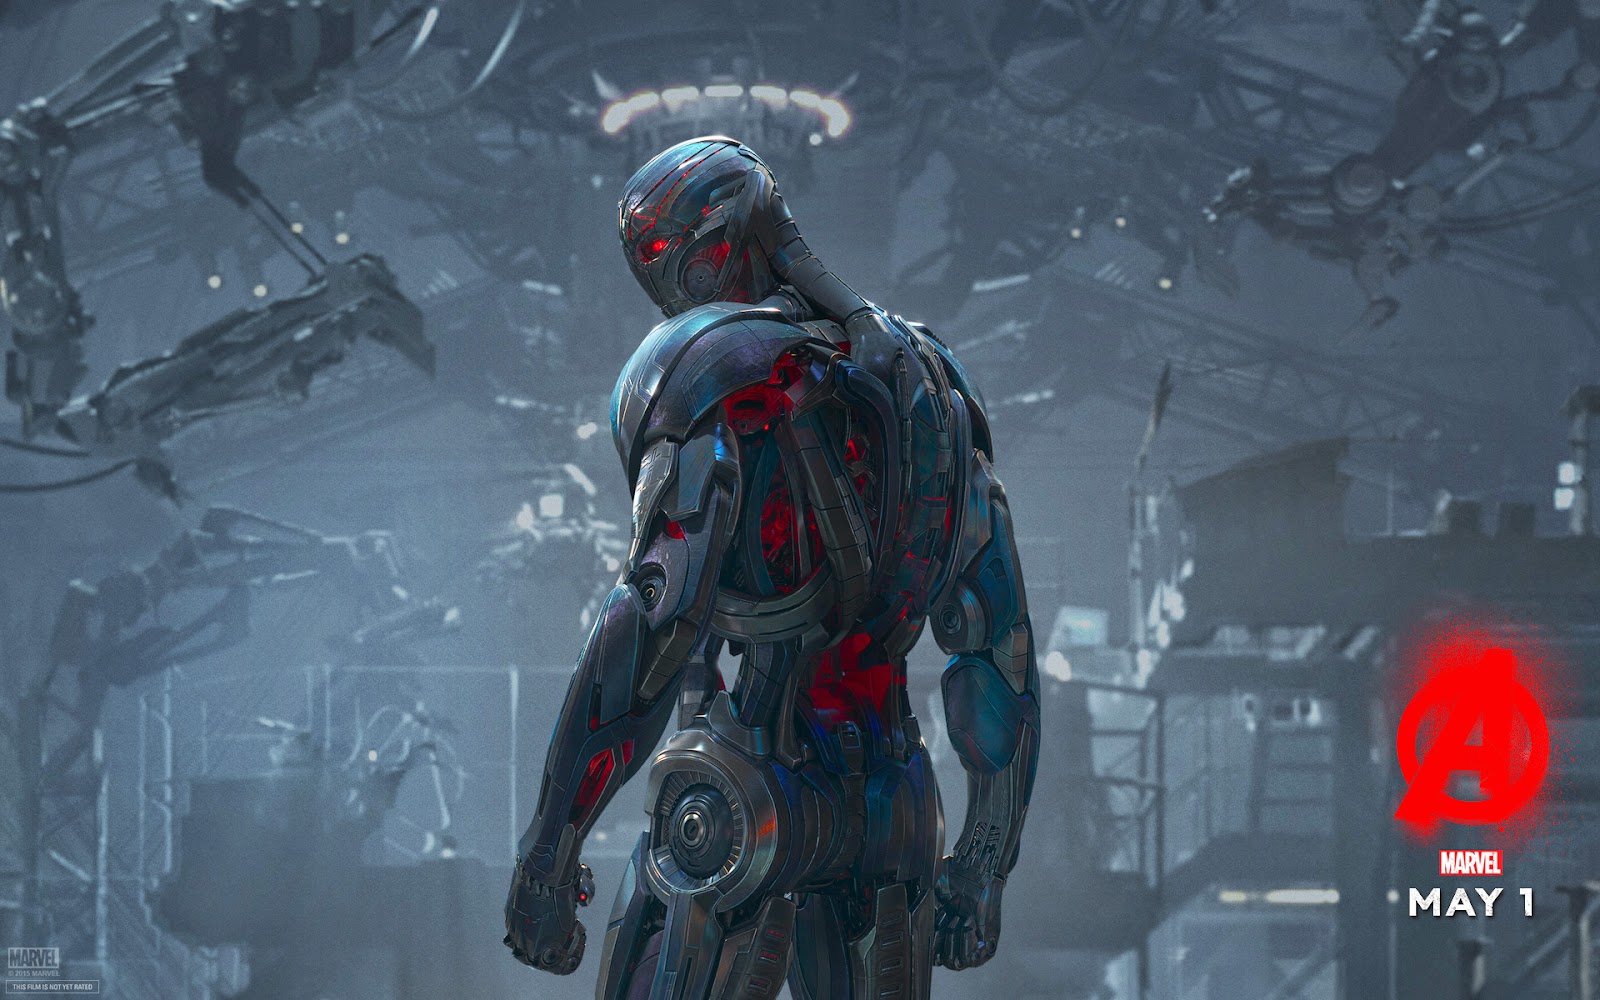 Avengers Age Of Ultron Wallpaper Kfzoom